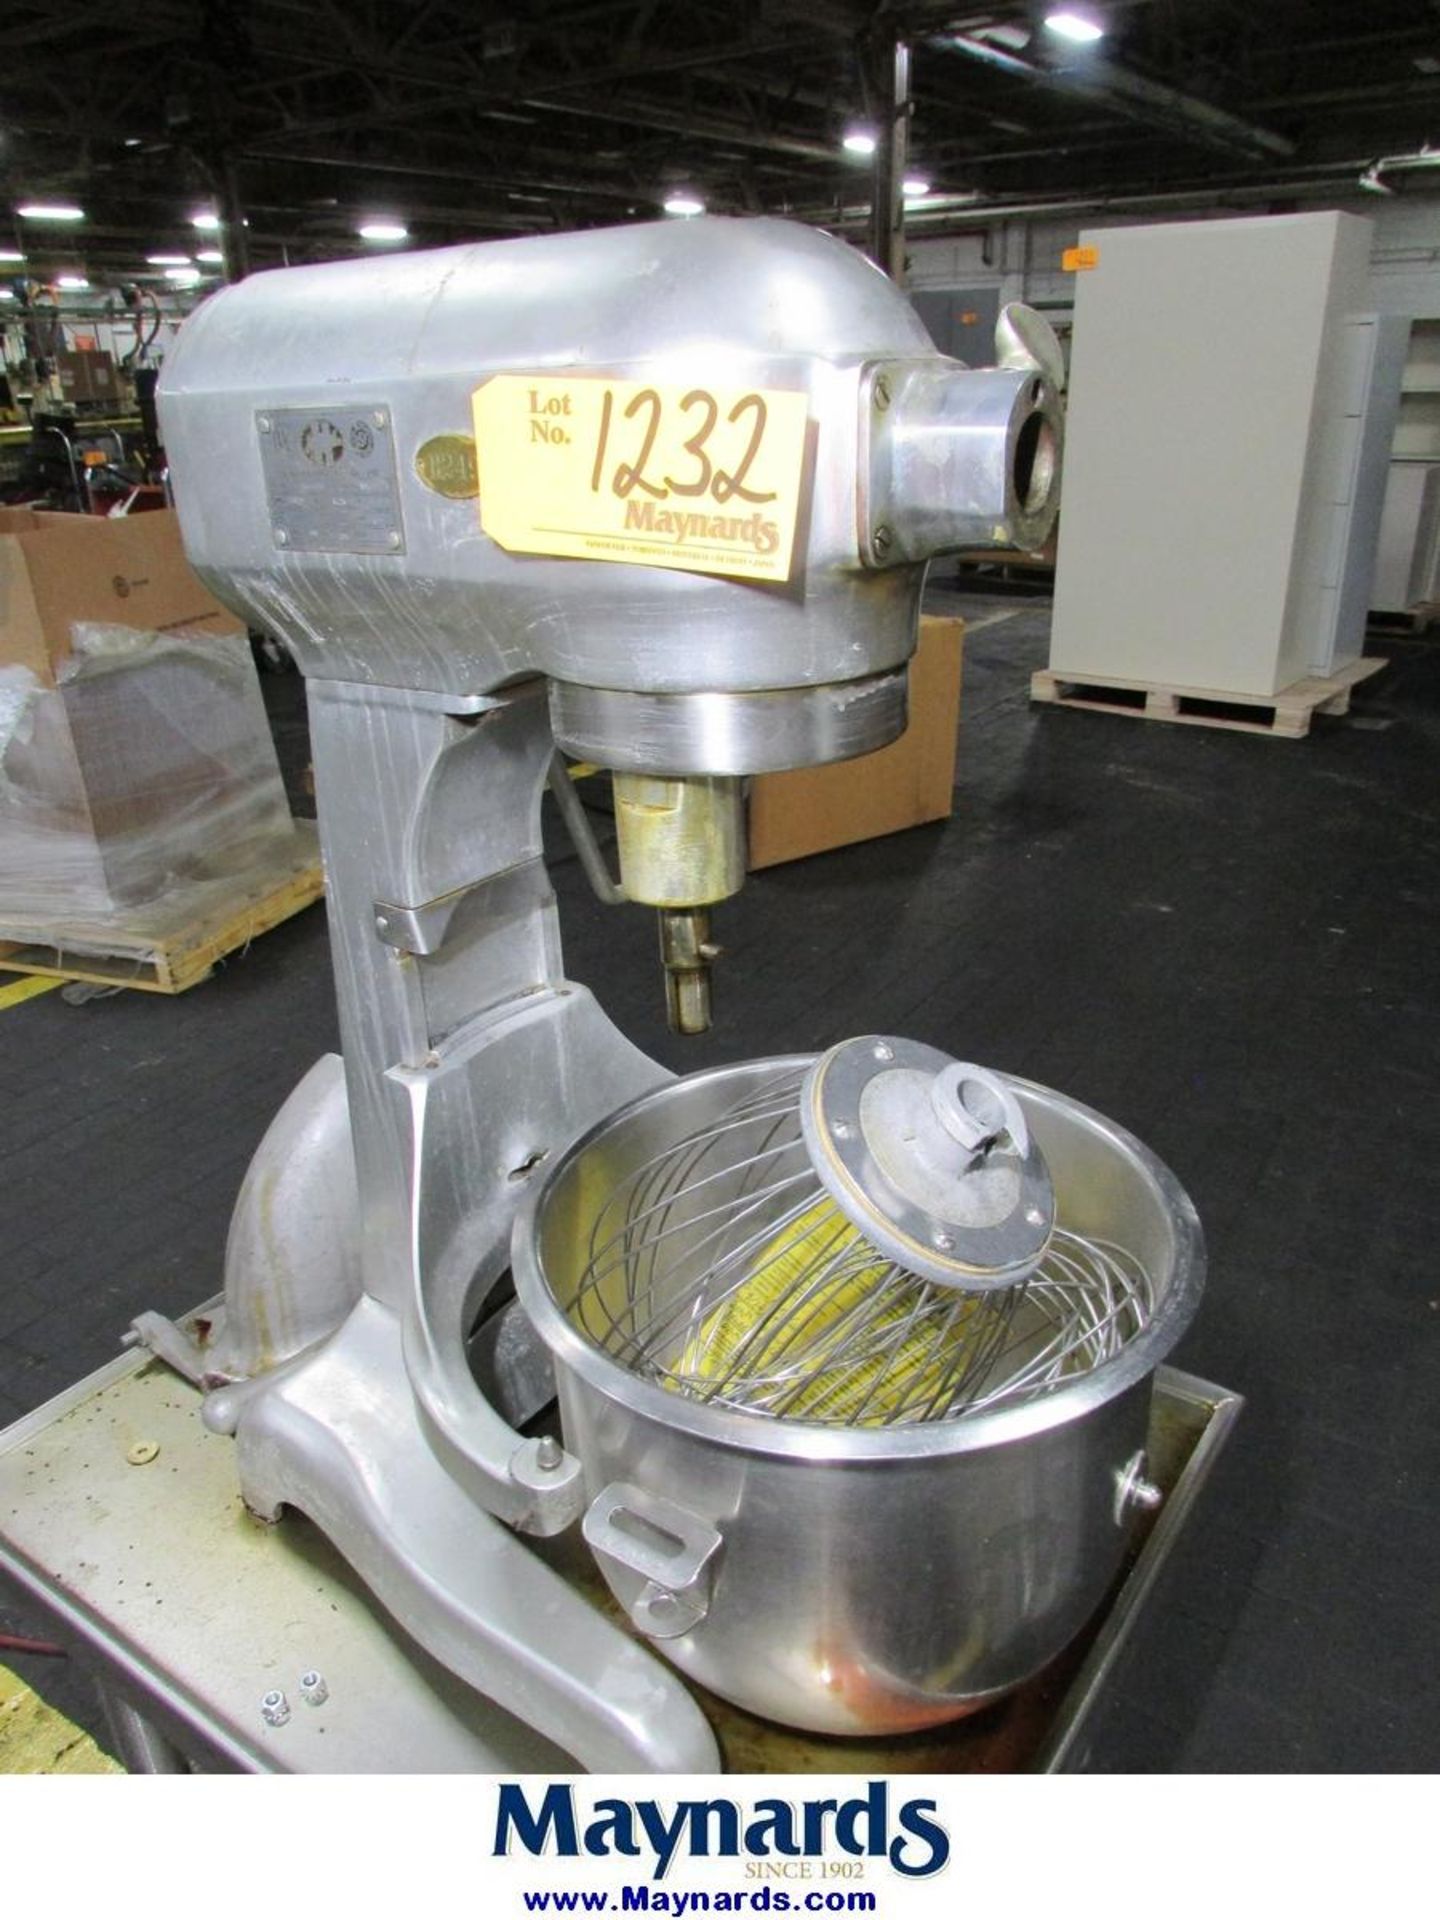 Hobart AS-200-DT Stainless Steel Commercial Mixer - Image 2 of 4